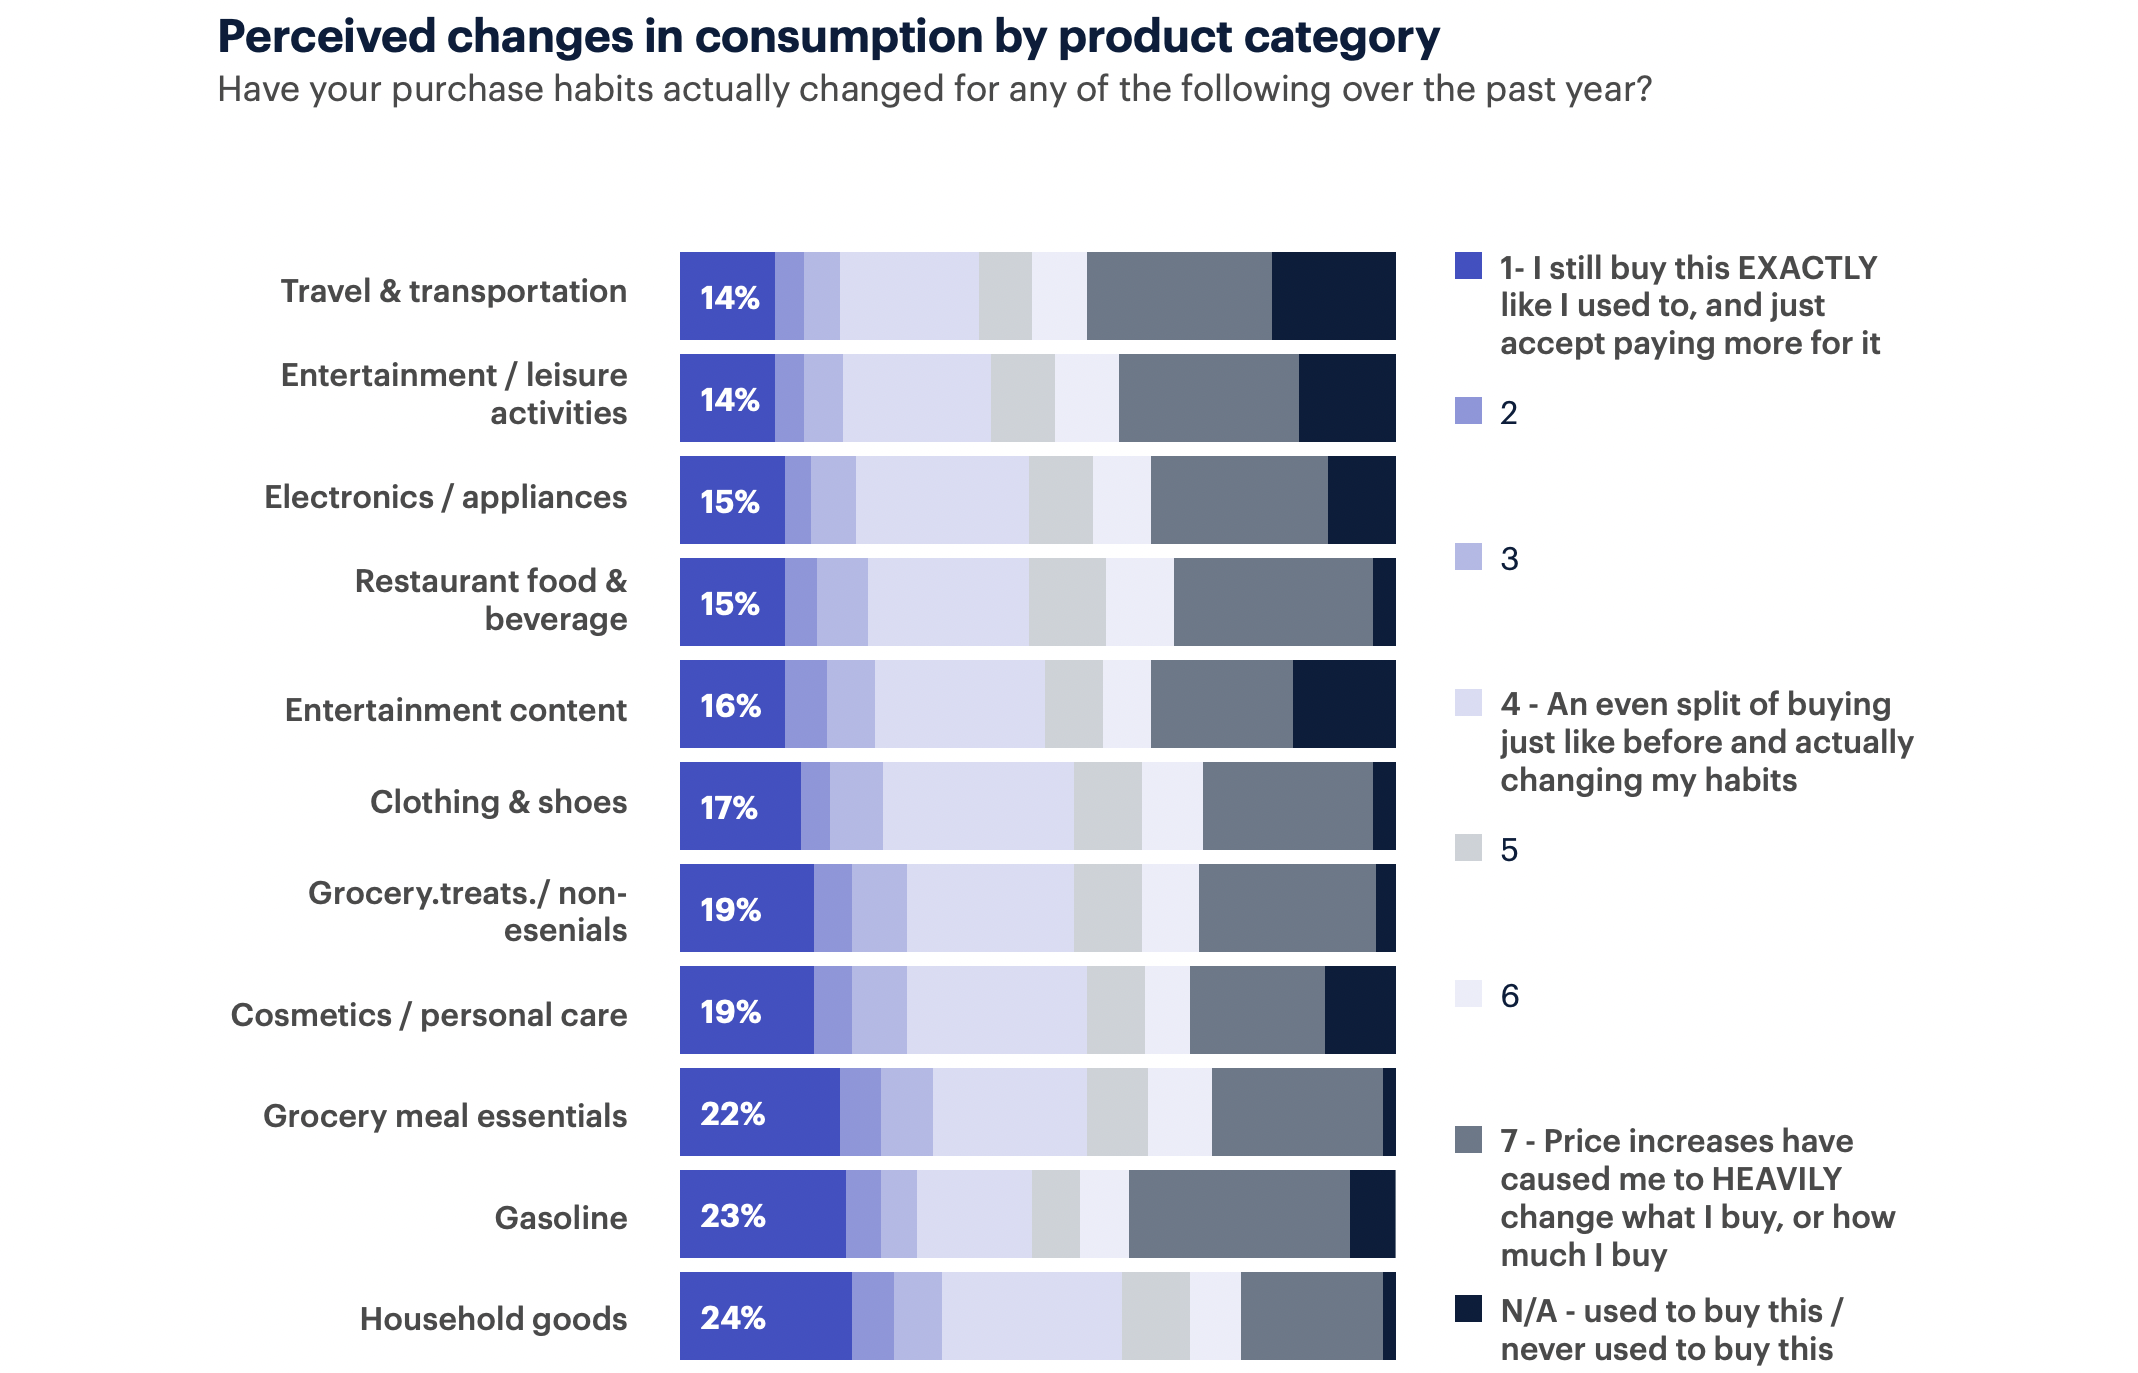 Perceived changes in consumption by product category; many still purchase household goods in the same manner